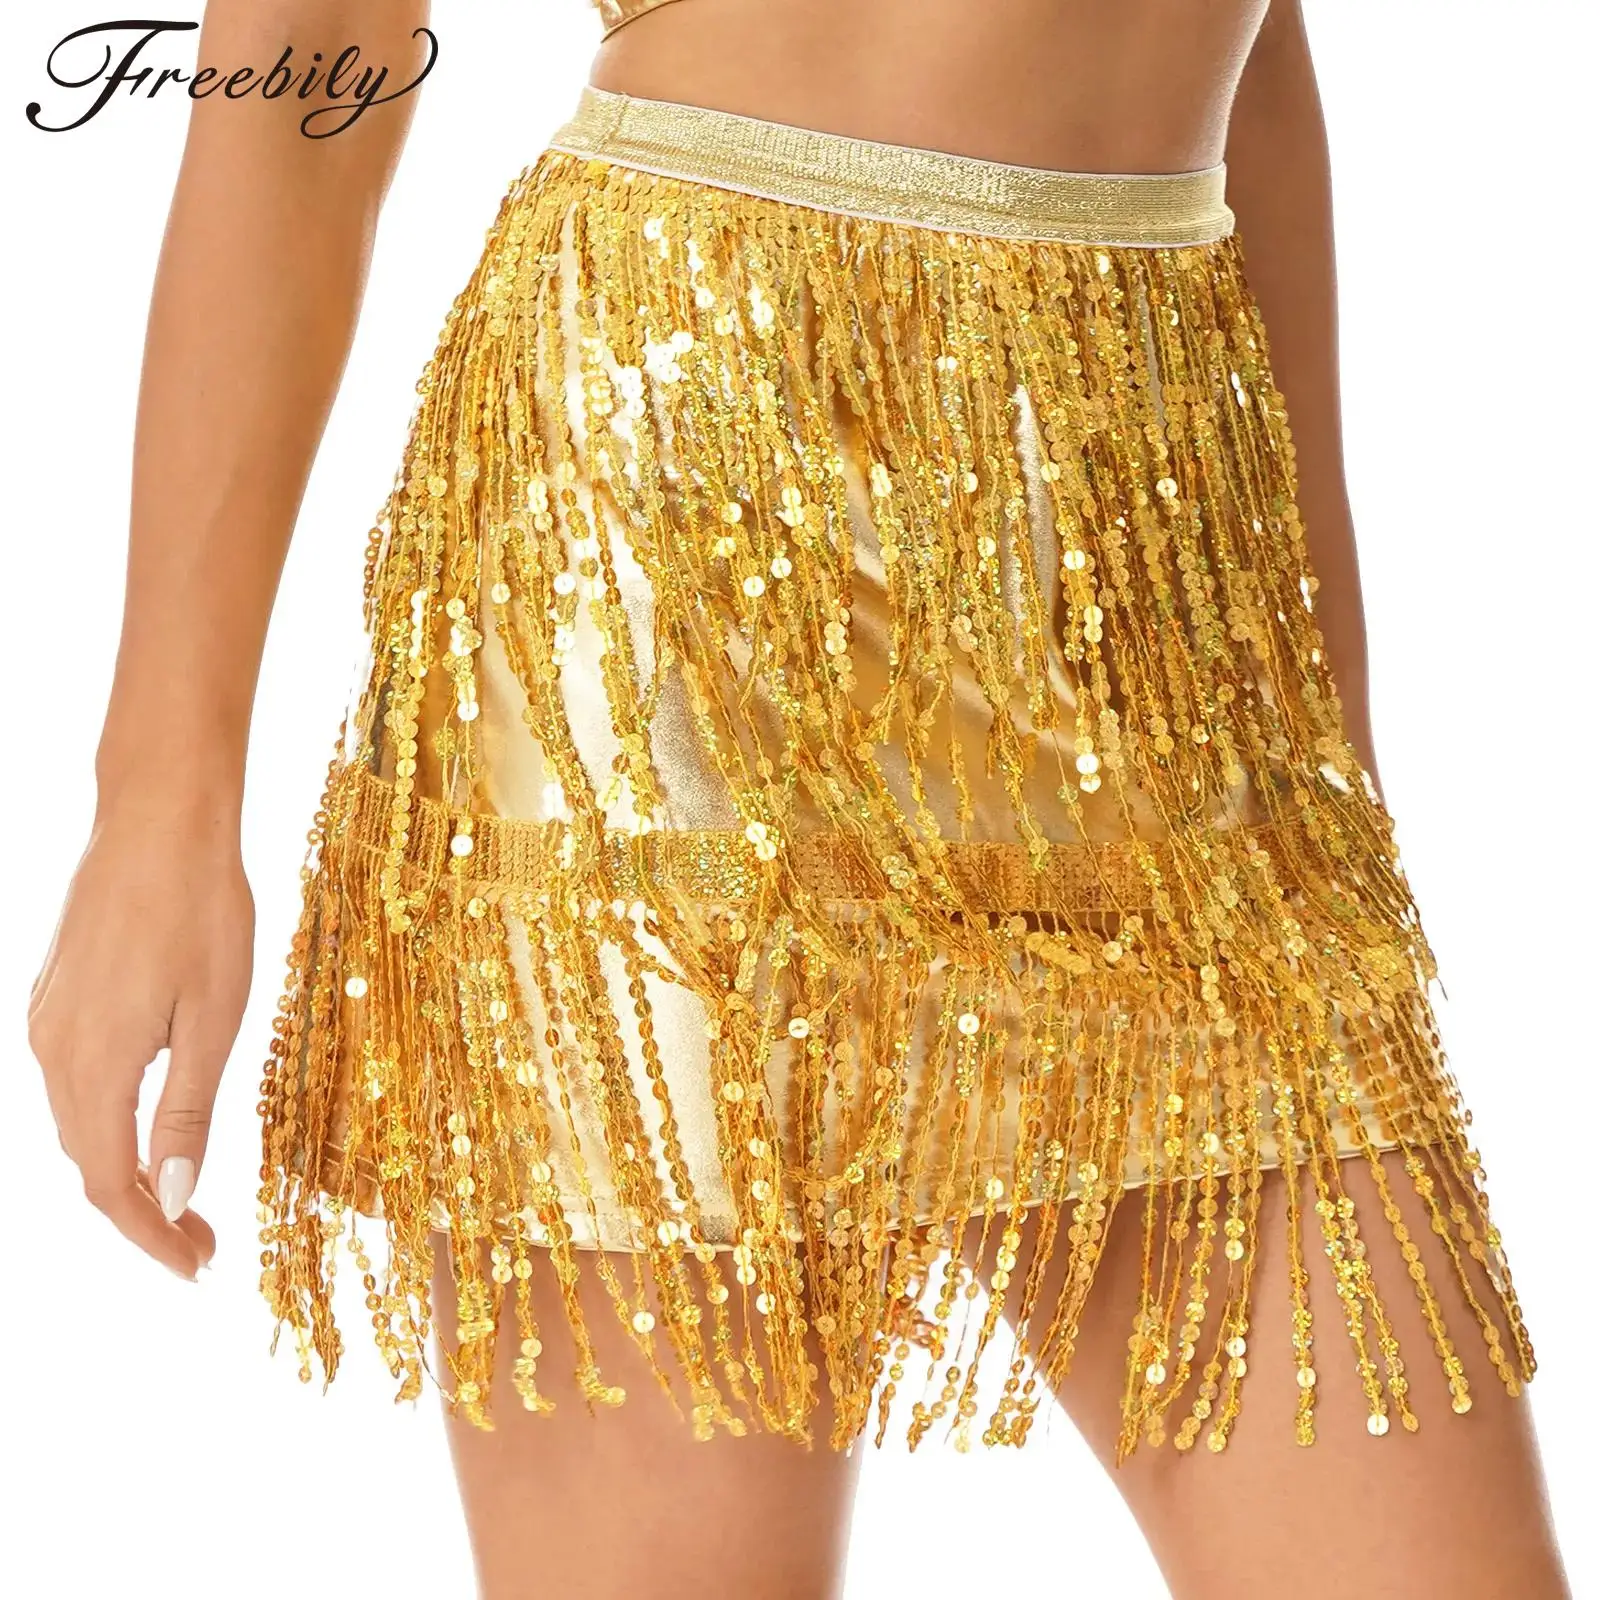 

Womens Sparkly Sequin Tassel Skirt Latin Dance Performance Costume Elastic Waistband Patent Leather Fringed Skirts Clubwear